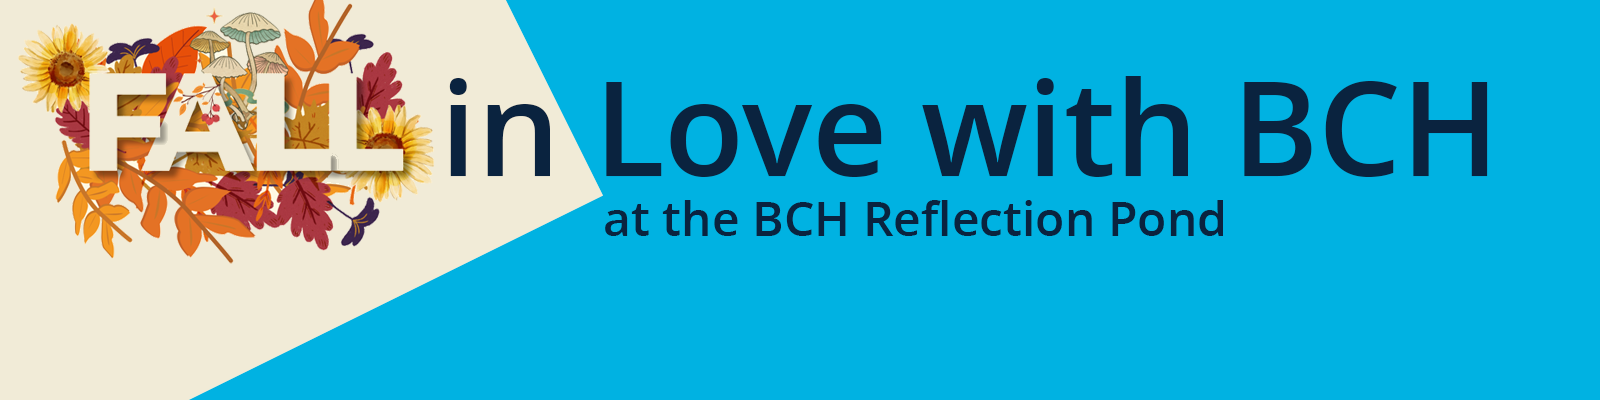 fall in love with bch at the reflection pond with leaves